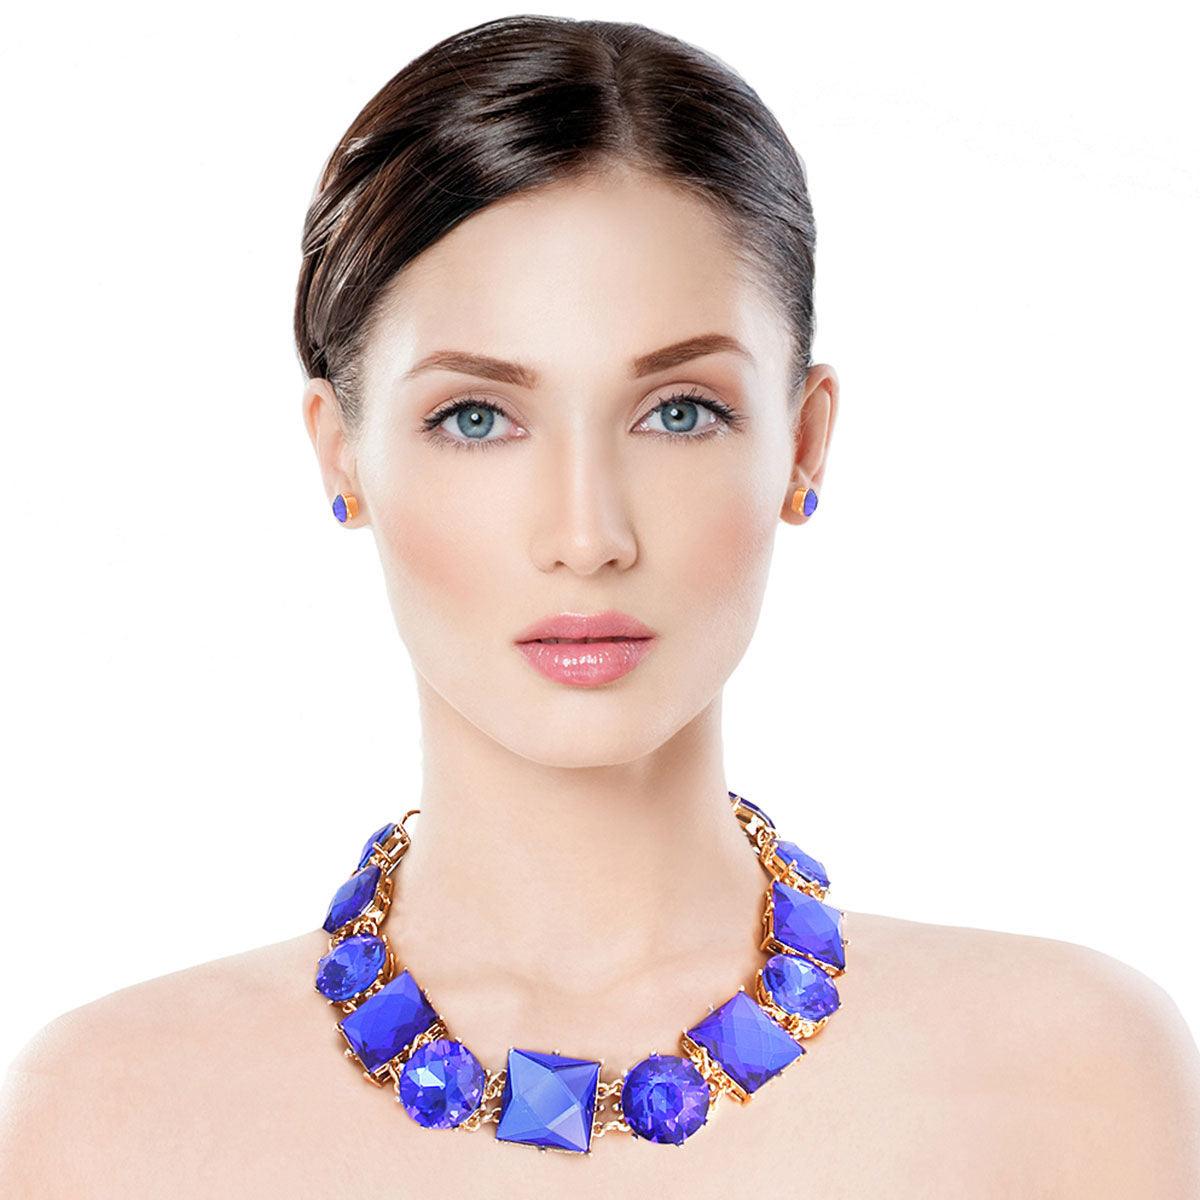 Cool Blue Acrylic-crystal Collar Necklace & Earrings Set - Buy Now!